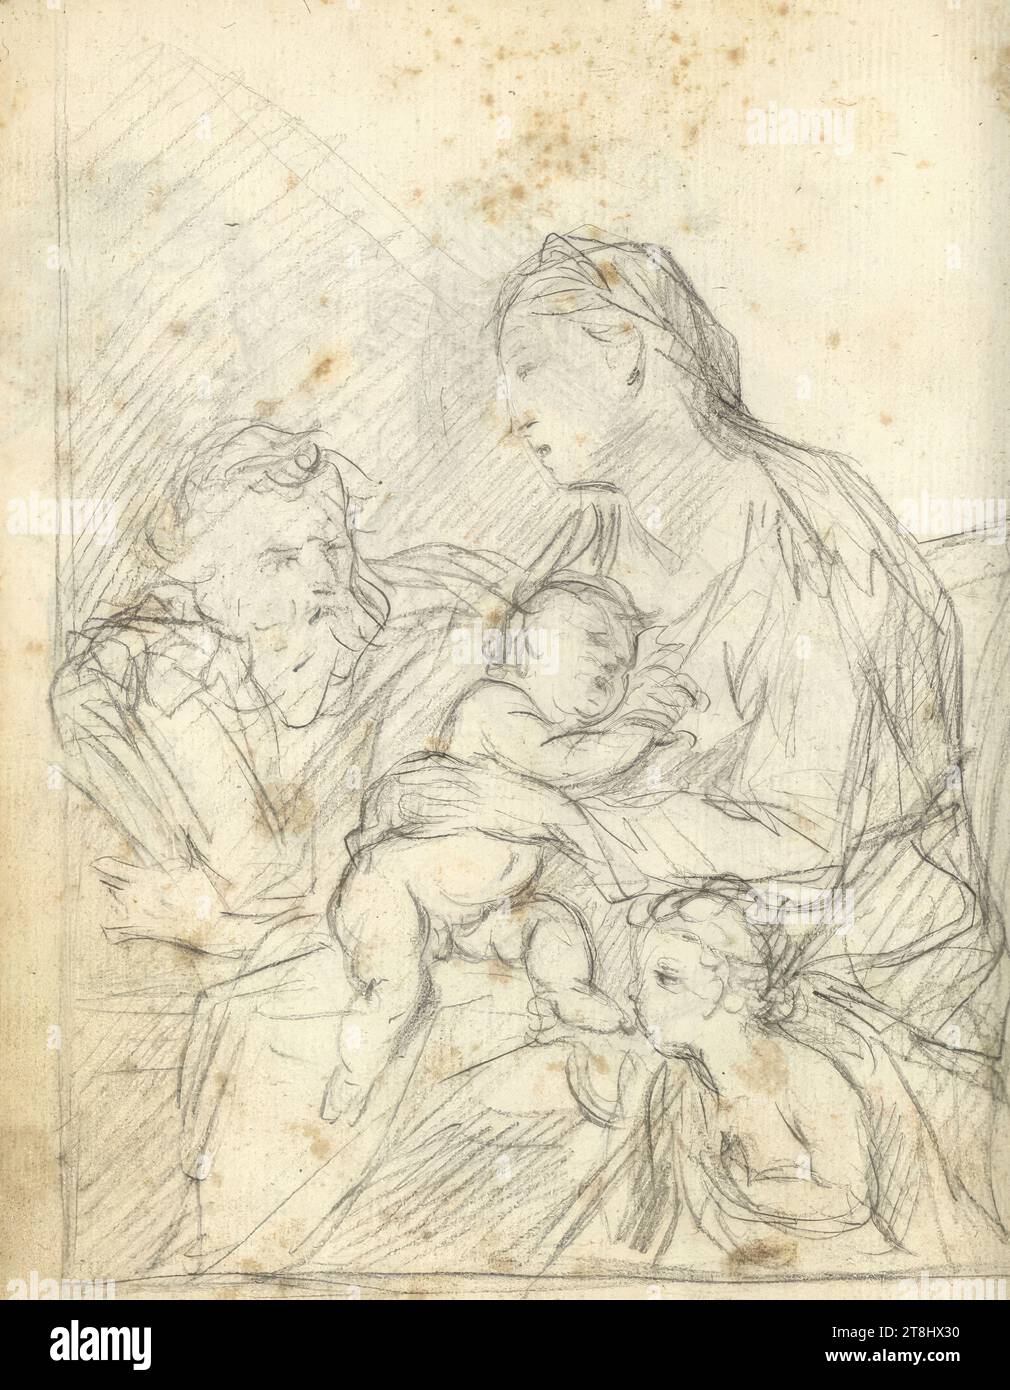 Holy Family, sketchbook Altomonte Bartolomeo; 64 paginated pages, Bartolomeo Altomonte, Warsaw 1694 - 1783 St. Florian, around 1720, drawing, lead pencil, 19.5 x 14 cm, 7 11/16 x 5 1/2 in., u. 'Dal Sig. Trevisani Stock Photo